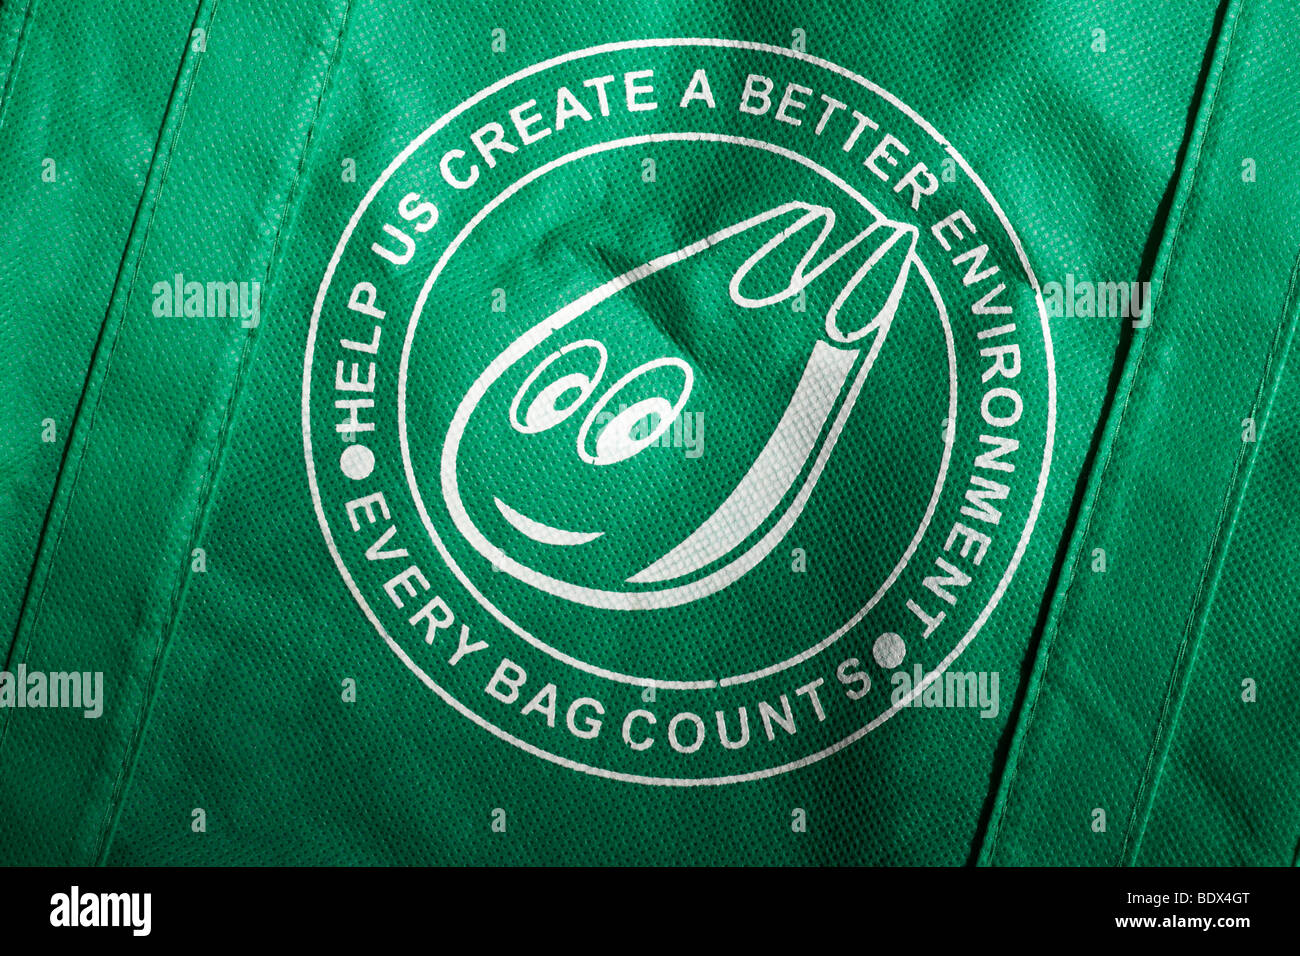 Help Us Create a Better Environment - Every Bag Counts shopping bag detail Stock Photo